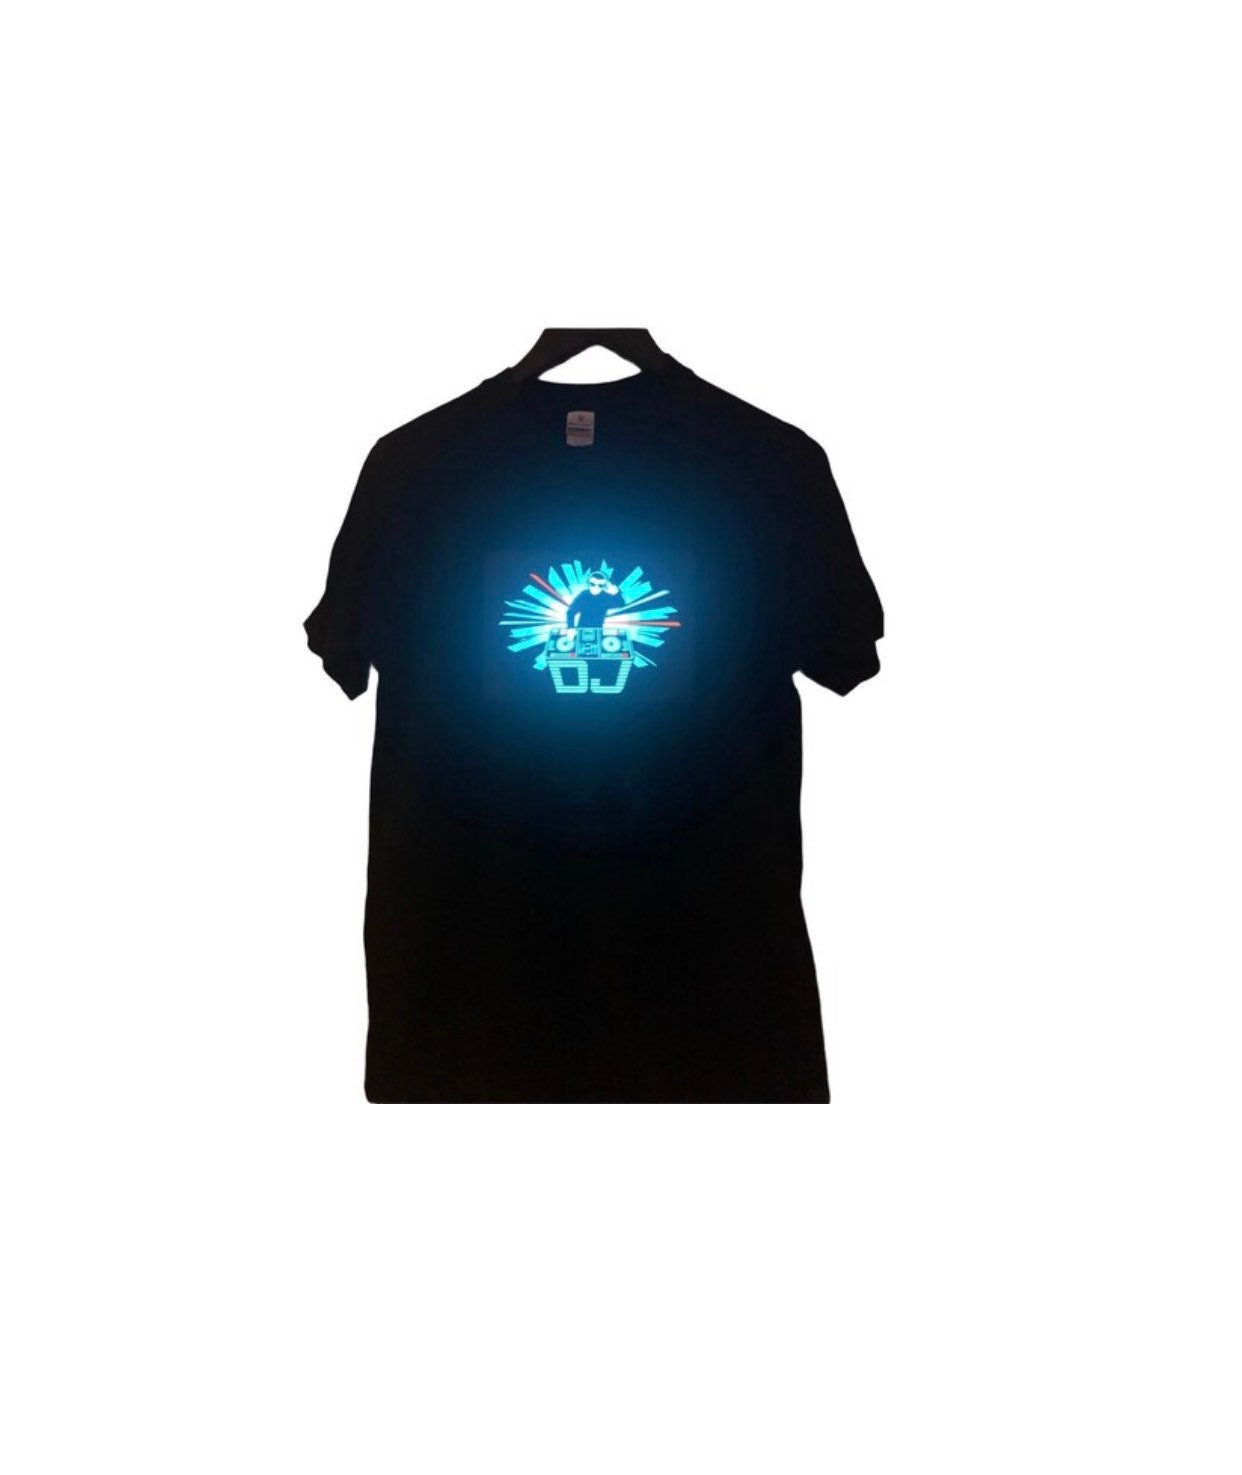 It’s Moving With Rhythm Of Music Or Any Voices Gift For Him/Her Music Gift Music Equaliser Led Light Up T-shirt